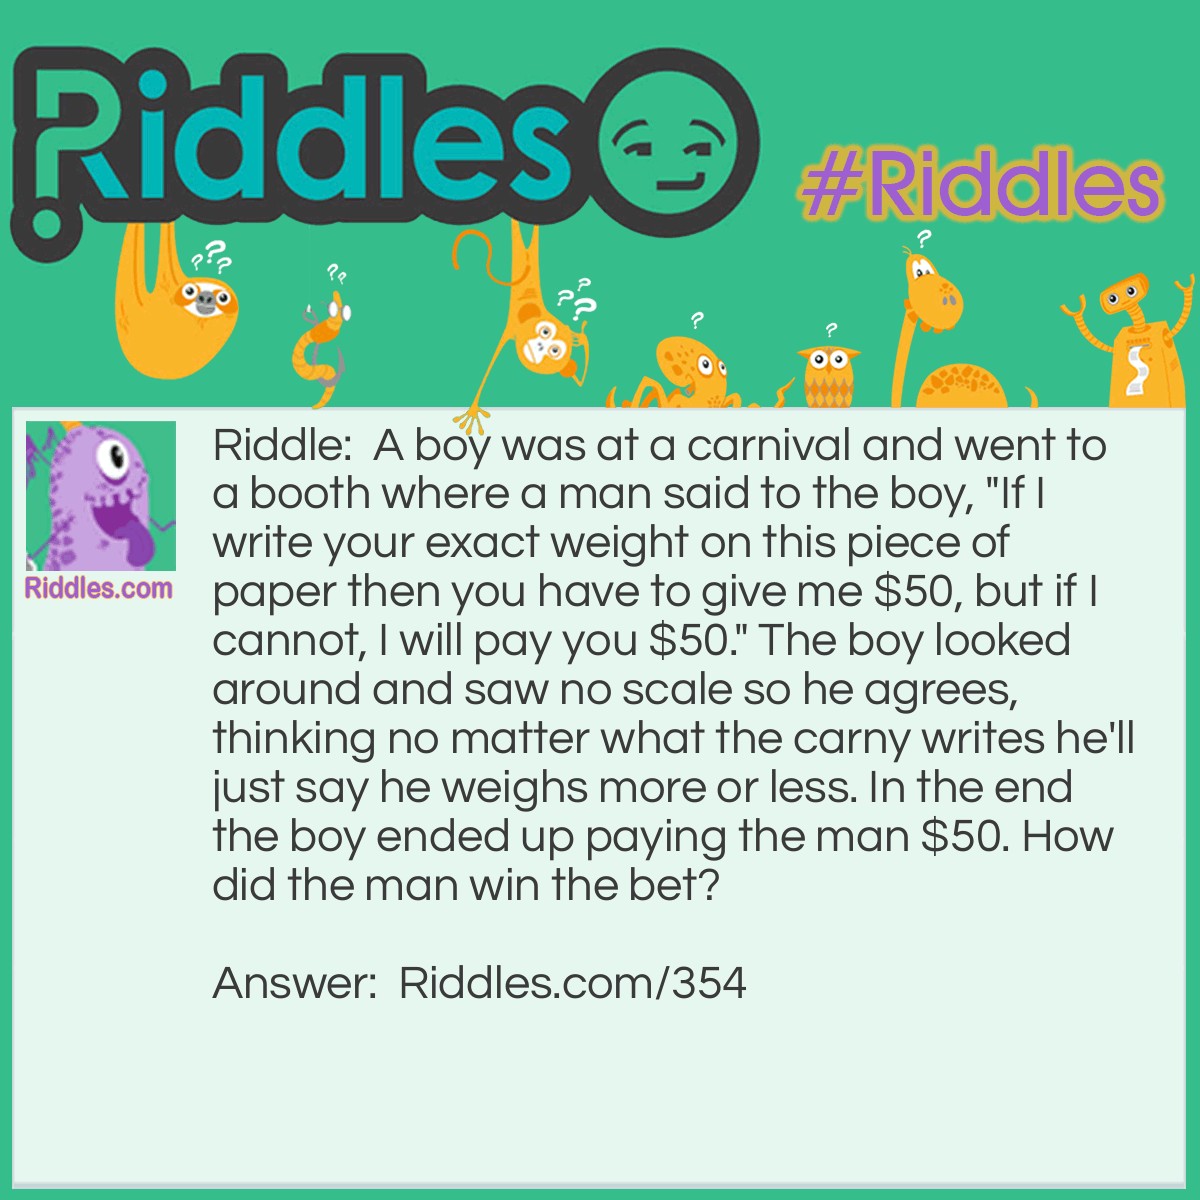 Riddle: A boy was at a carnival and went to a booth where a man said to the boy, "If I write your exact weight on this piece of paper then you have to give me $50, but if I cannot, I will pay you $50." The boy looked around and saw no scale so he agrees, thinking no matter what the carny writes he'll just say he weighs more or less. In the end the boy ended up paying the man $50. How did the man win the bet? Answer: The man did exactly as he said he would and wrote "your exact weight" on the paper.